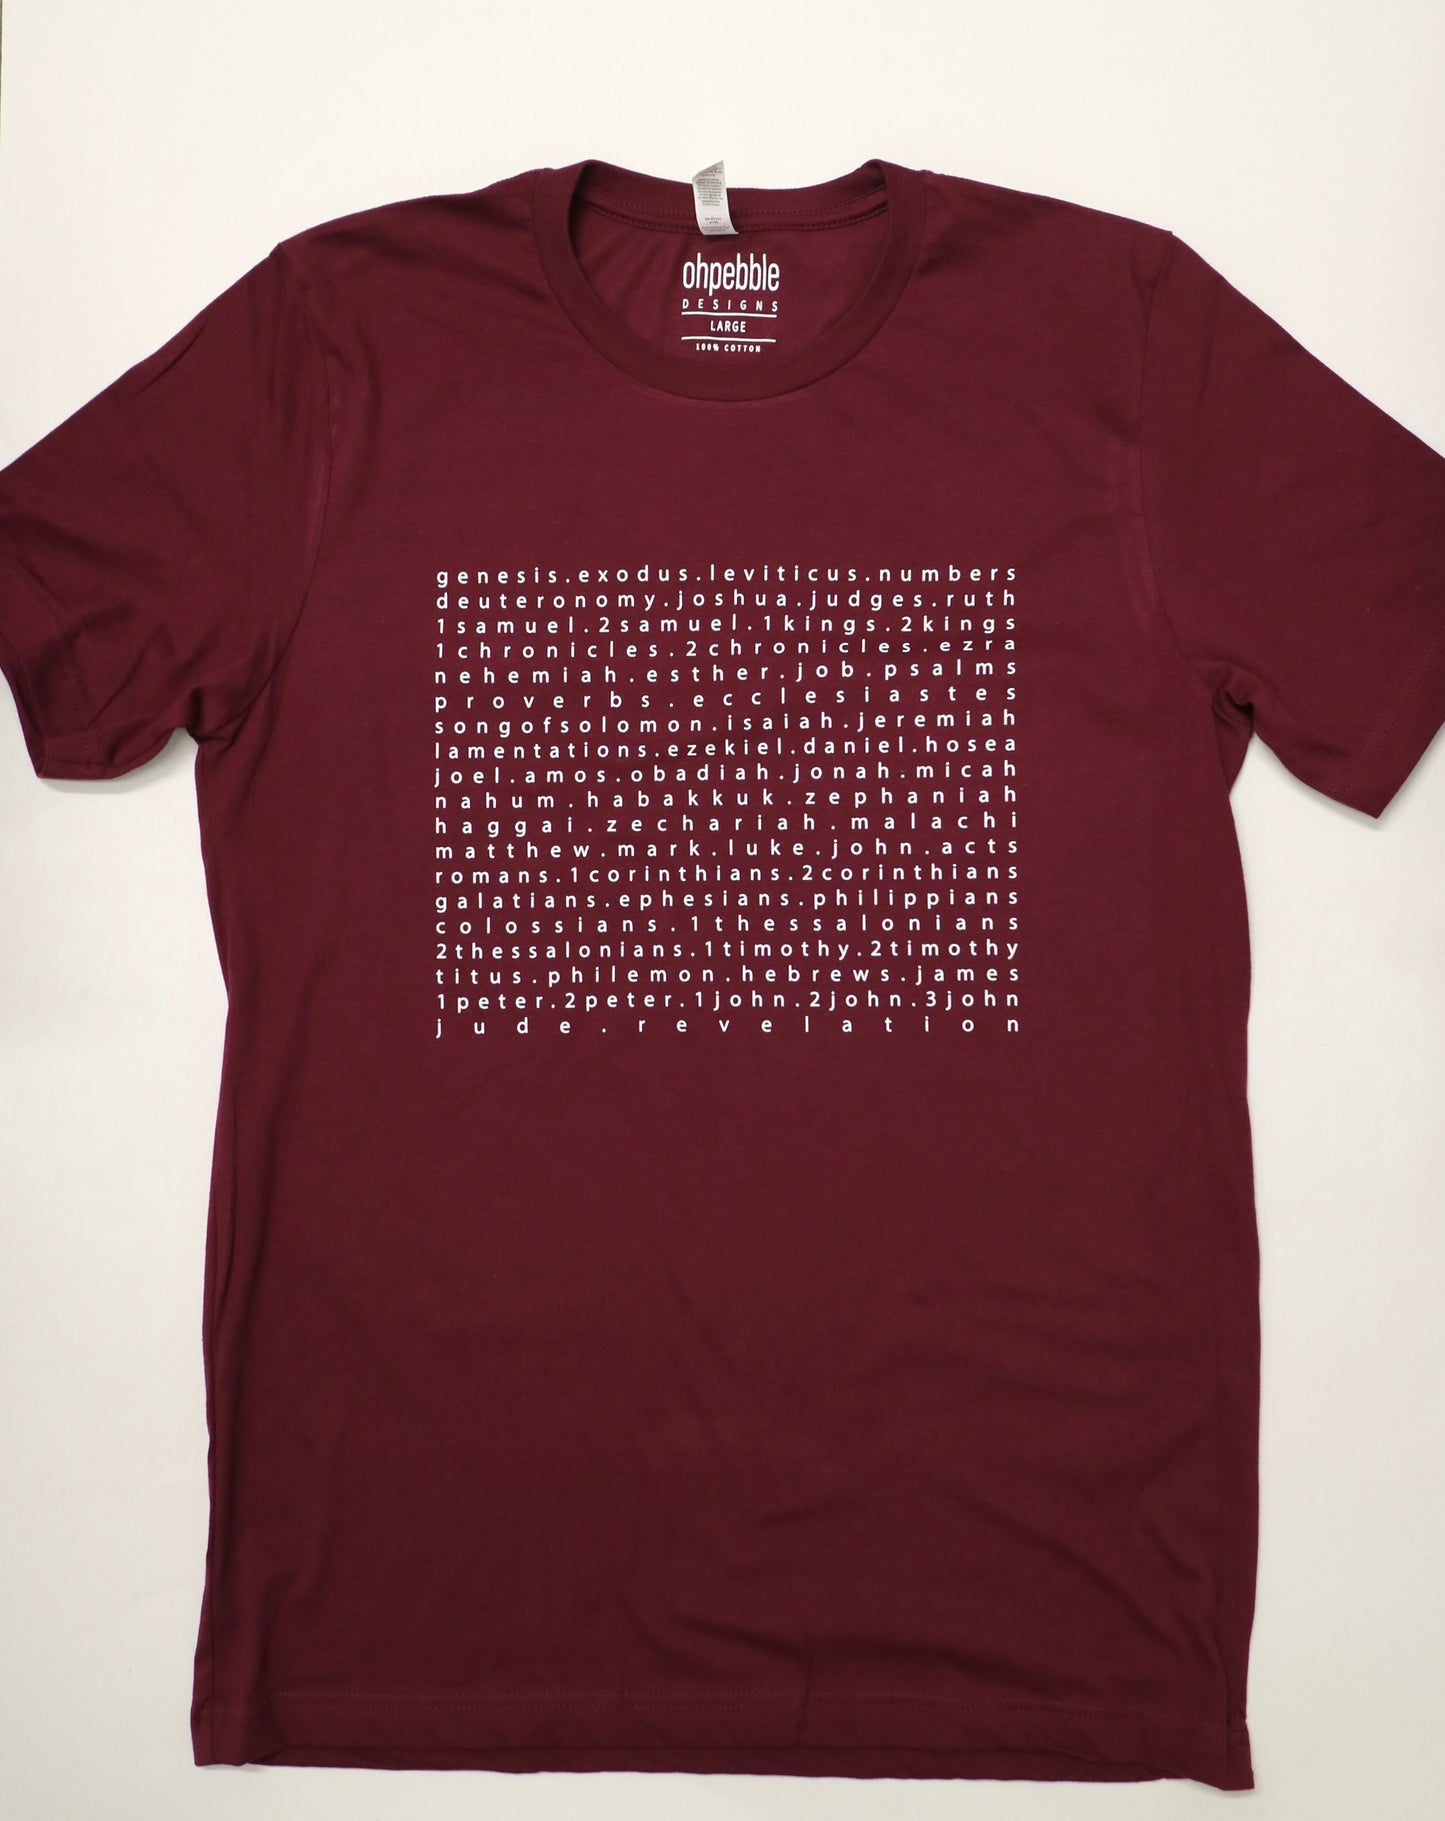 Books of the Bible Tee in Black Cherry